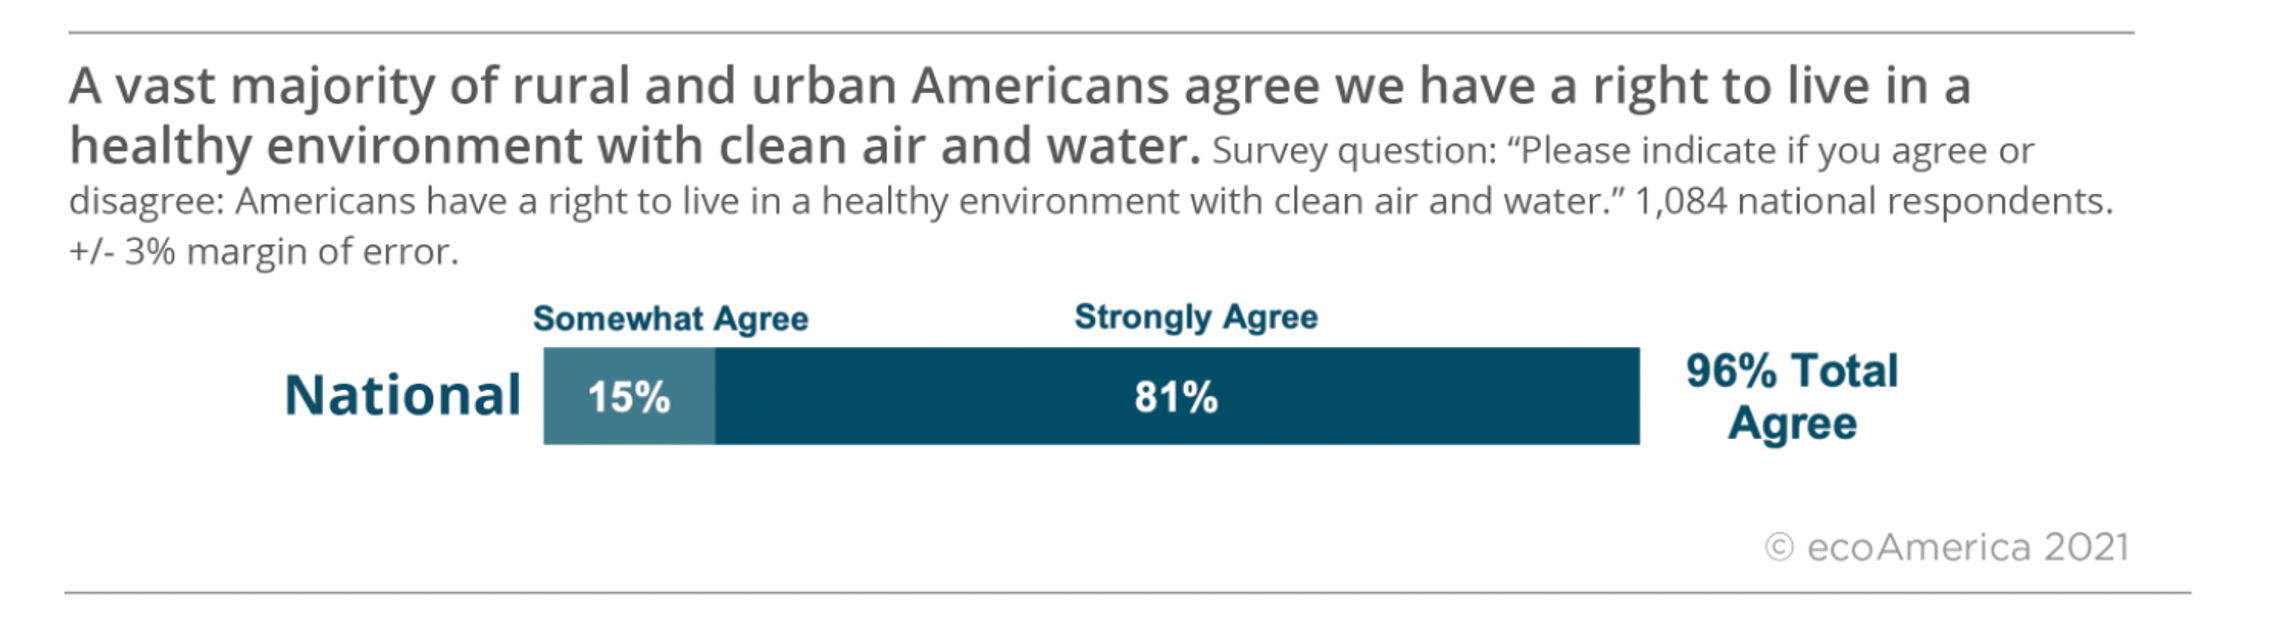 A single bar graph that displays 96% of Americans agree we have a right to live in a healthy environment with clean air and water. The graph shows that 81% strongly agree and 15% somewhat agree.